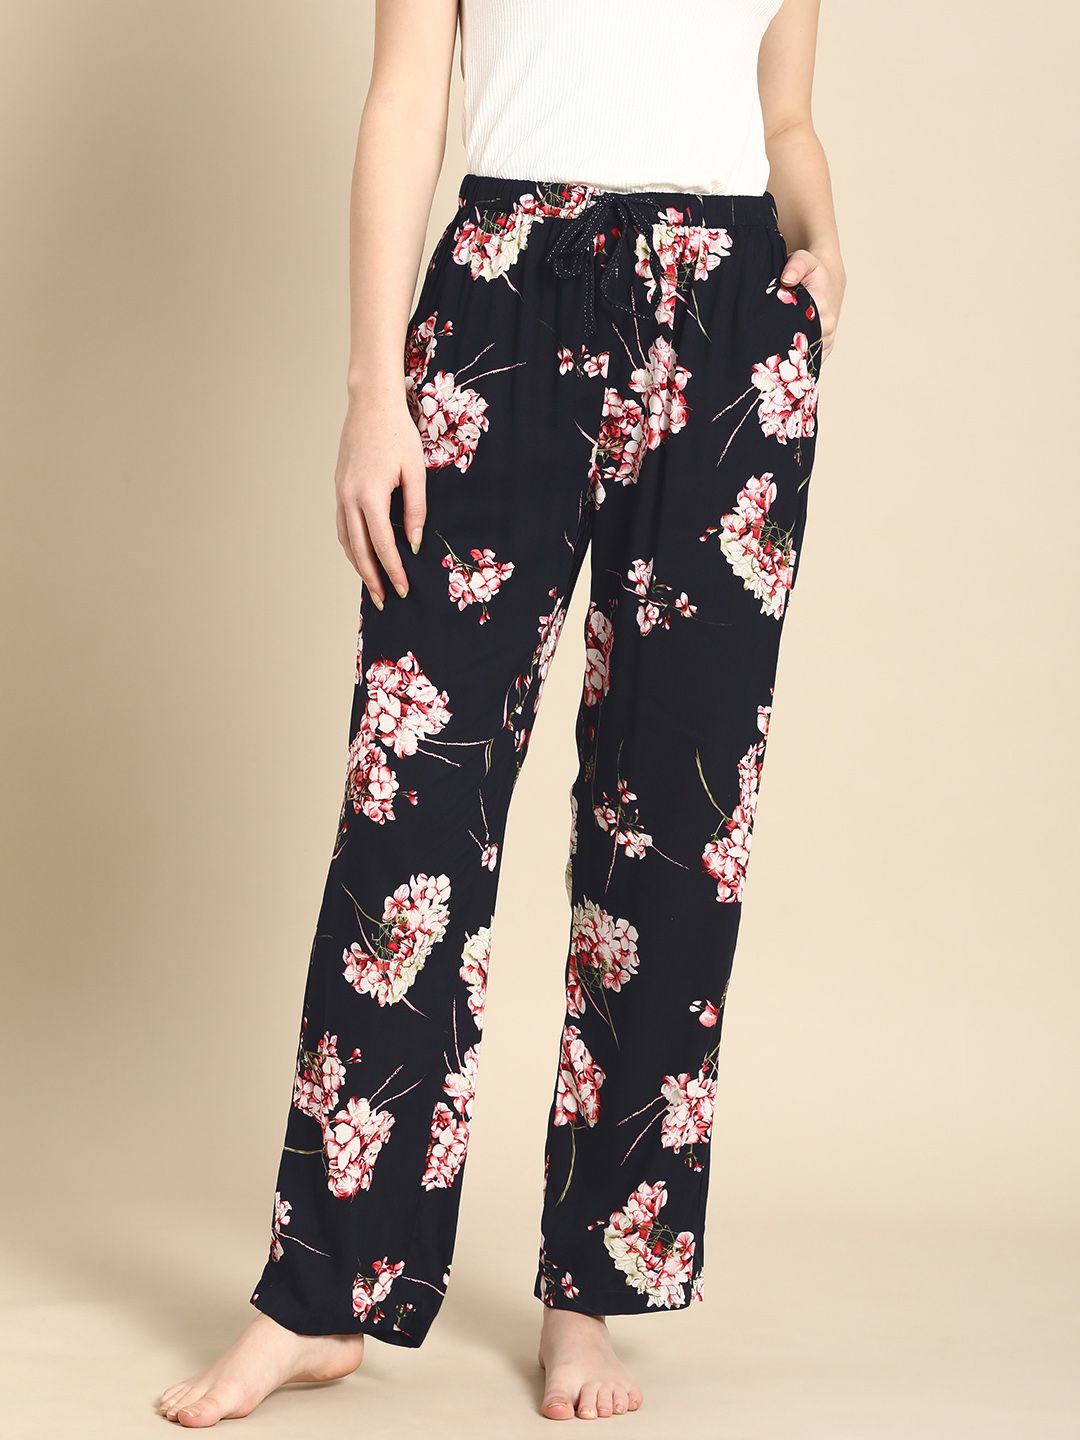 Dreamz by Pantaloons Women Black Floral Printed Lounge Pants Price in India